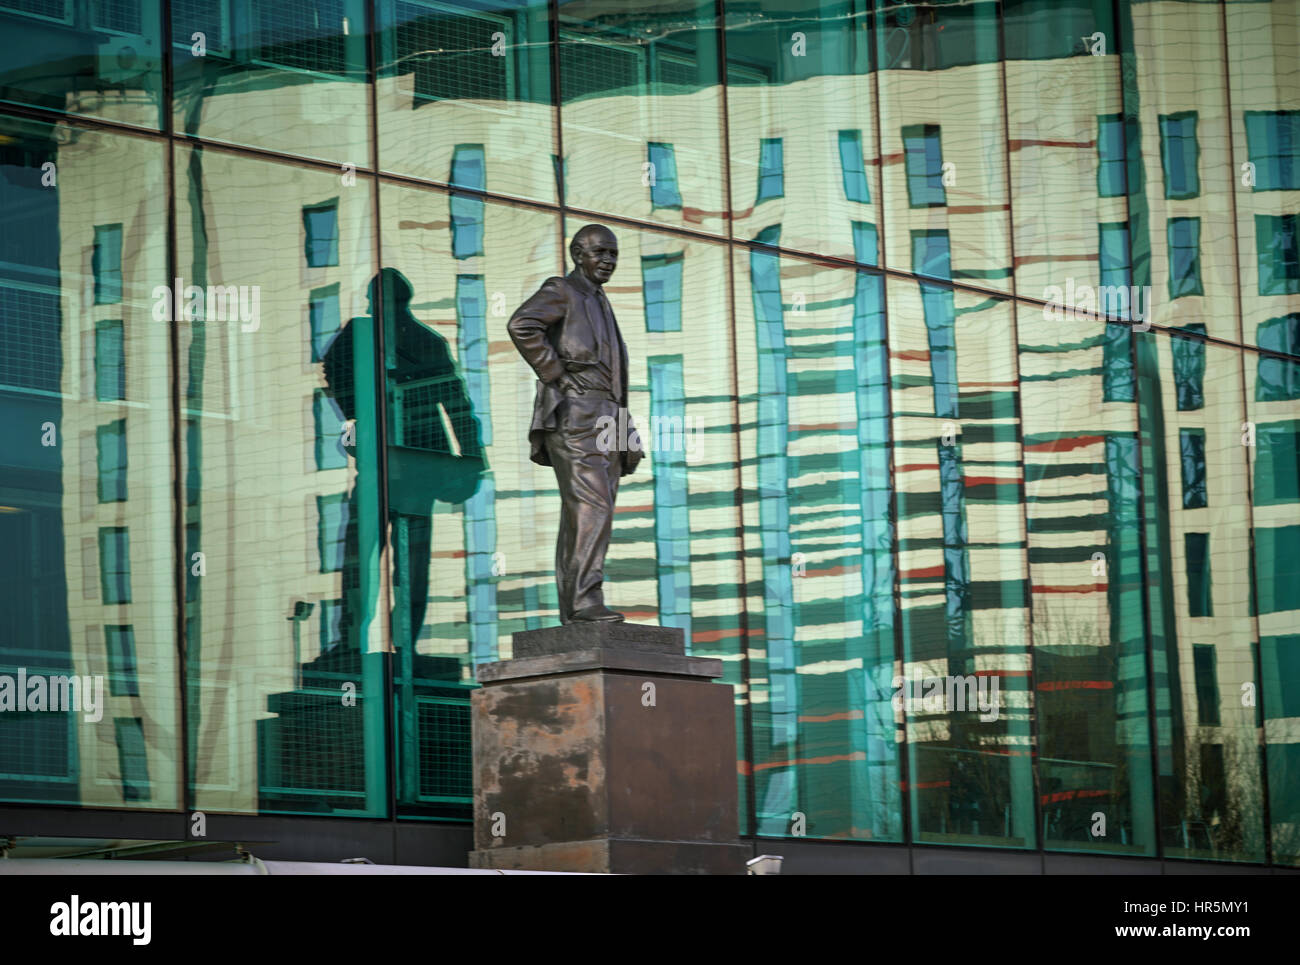 Hotel Football reflects in the glass Sir Matt Busby statue at Old Trafford Stadium Manchester England,UK Stock Photo